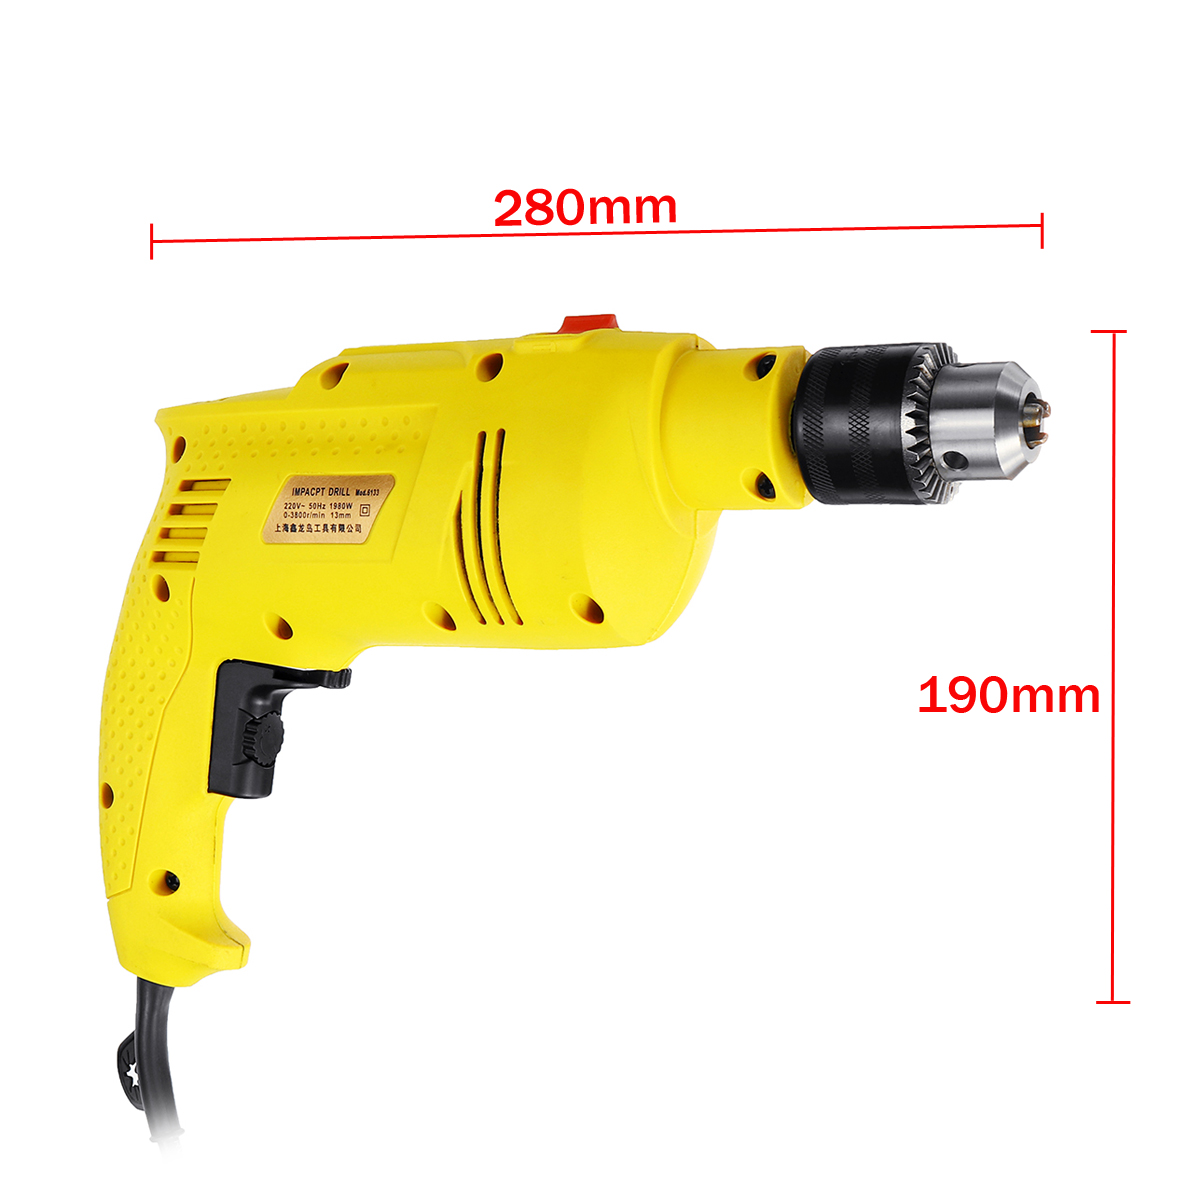 1980W-3800rpm-Electric-Impact-Drill-0-3800rmin-Electric-Drill-Five-Axes-Linkage-Power-Drills-Powerfu-1468497-4